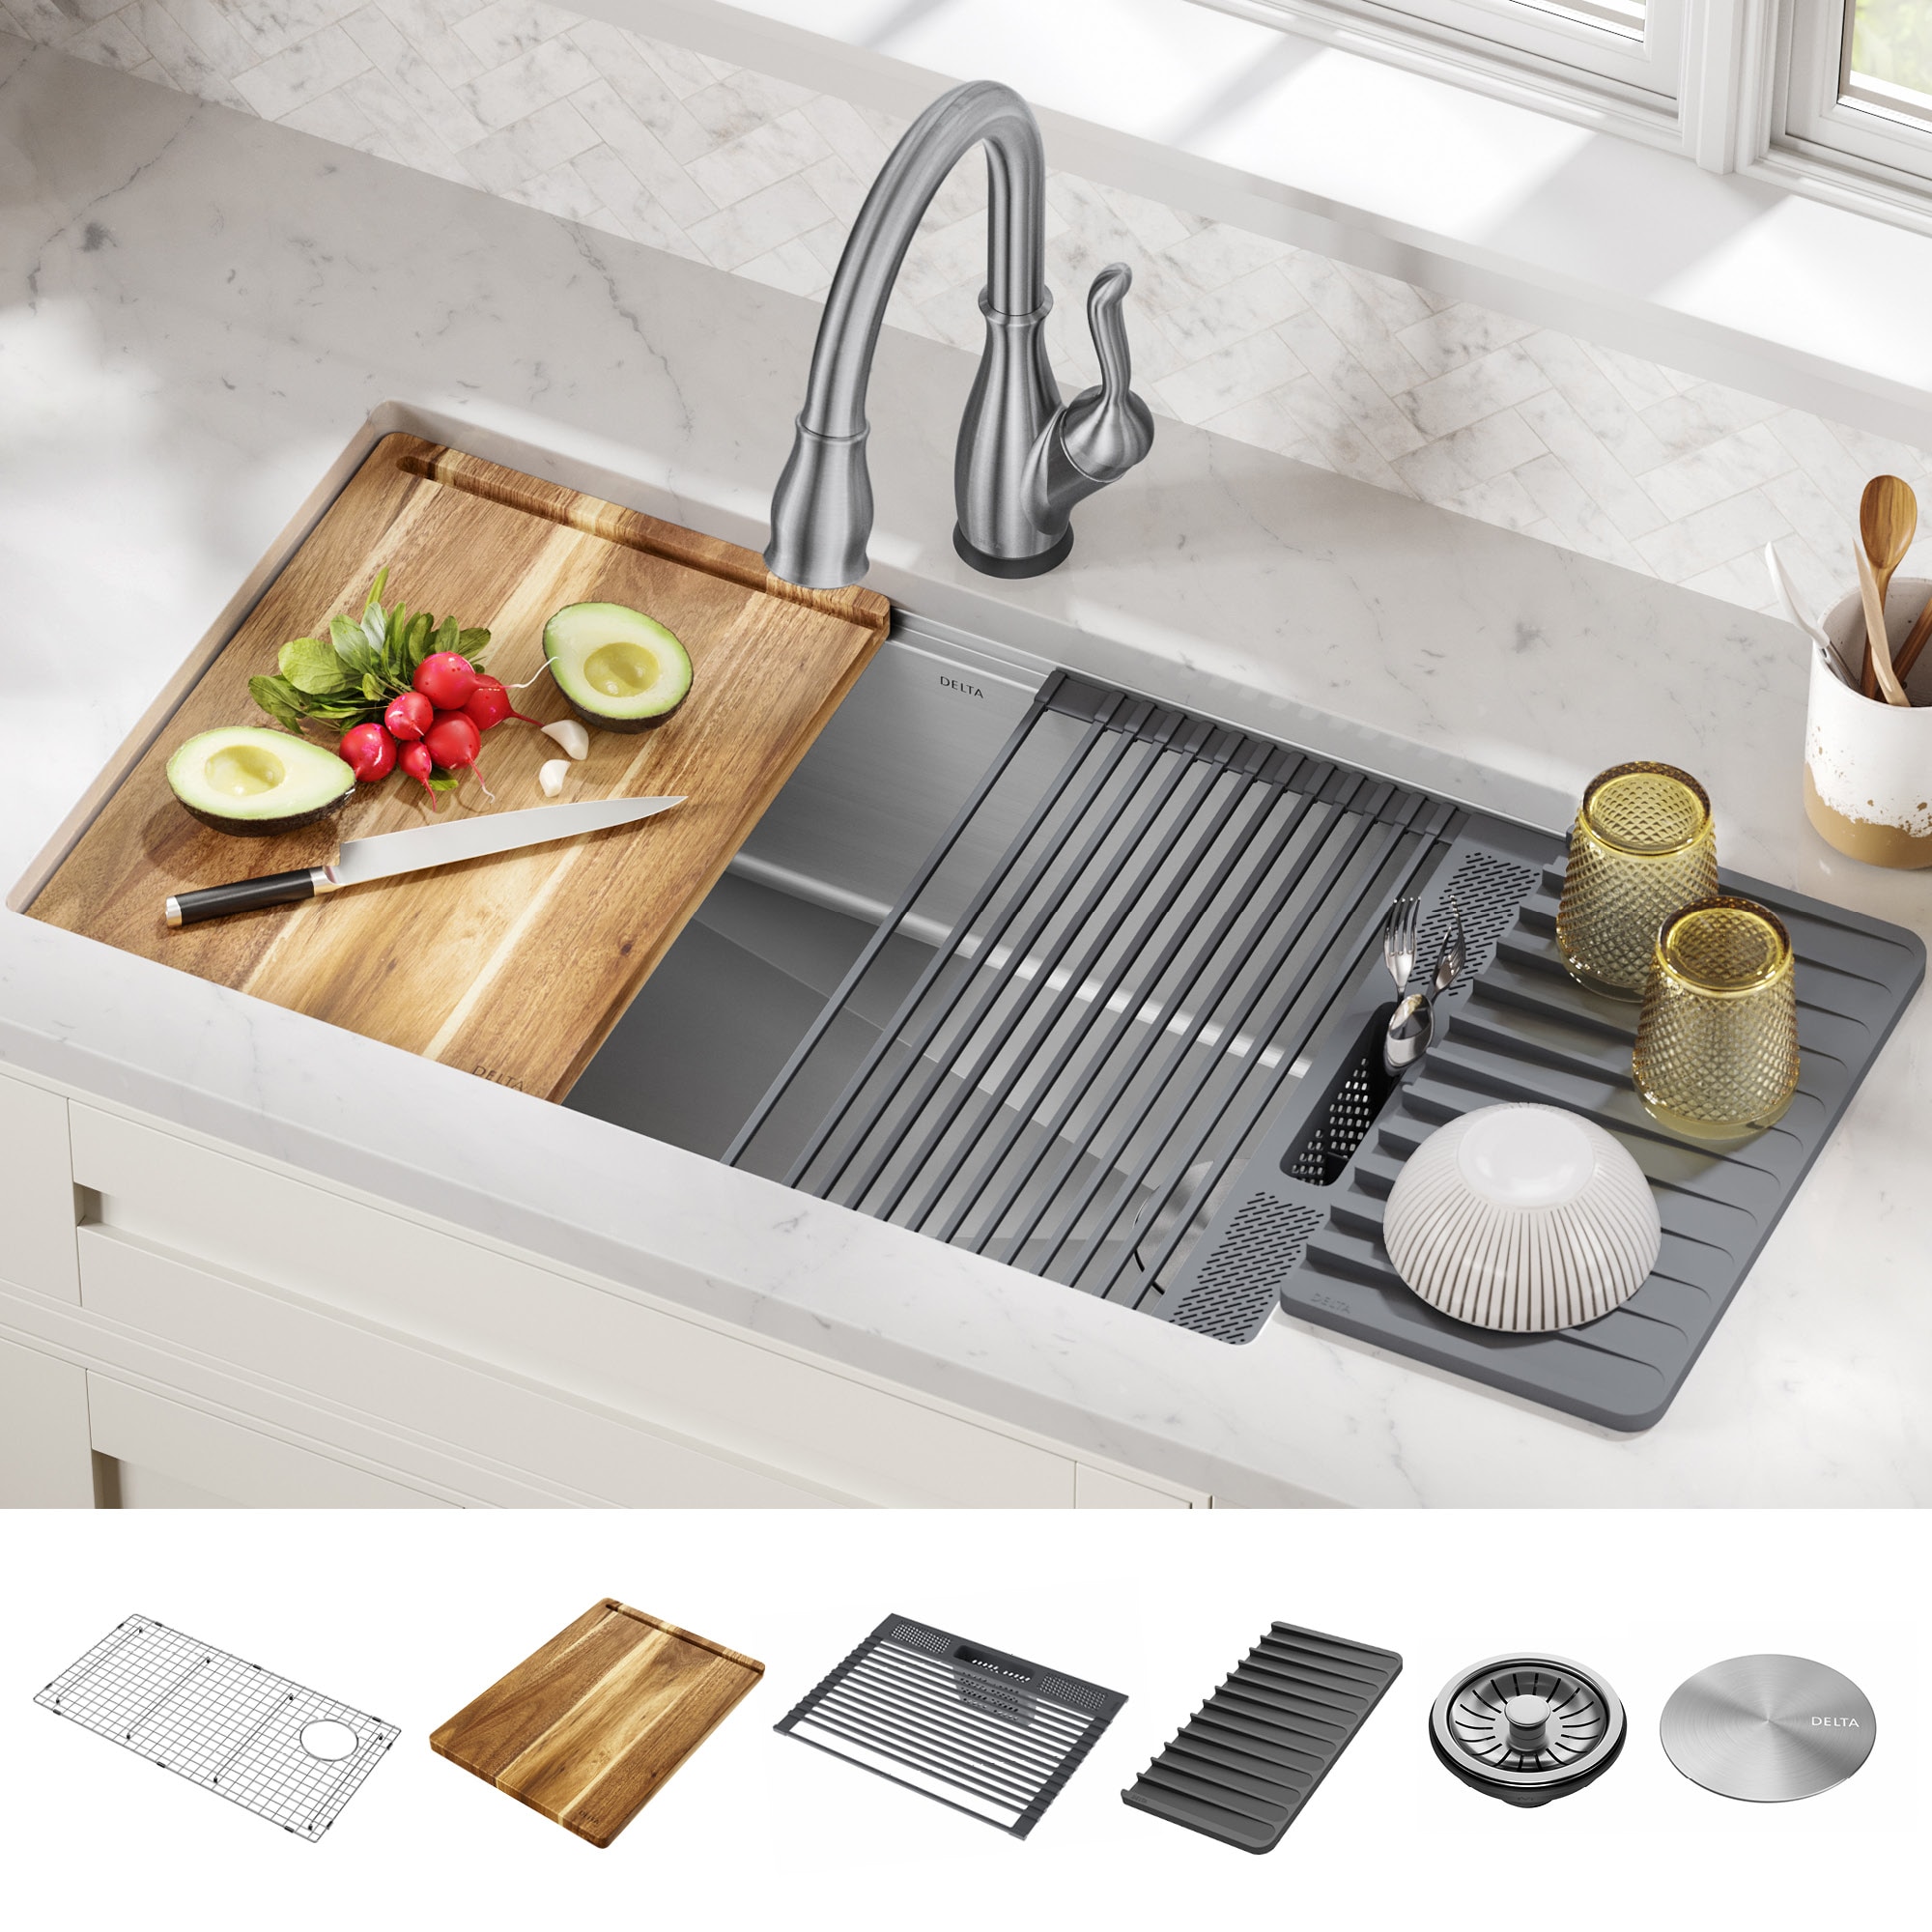 Delta Lorelai Undermount 30 In X 19, Stainless Countertop With Sink